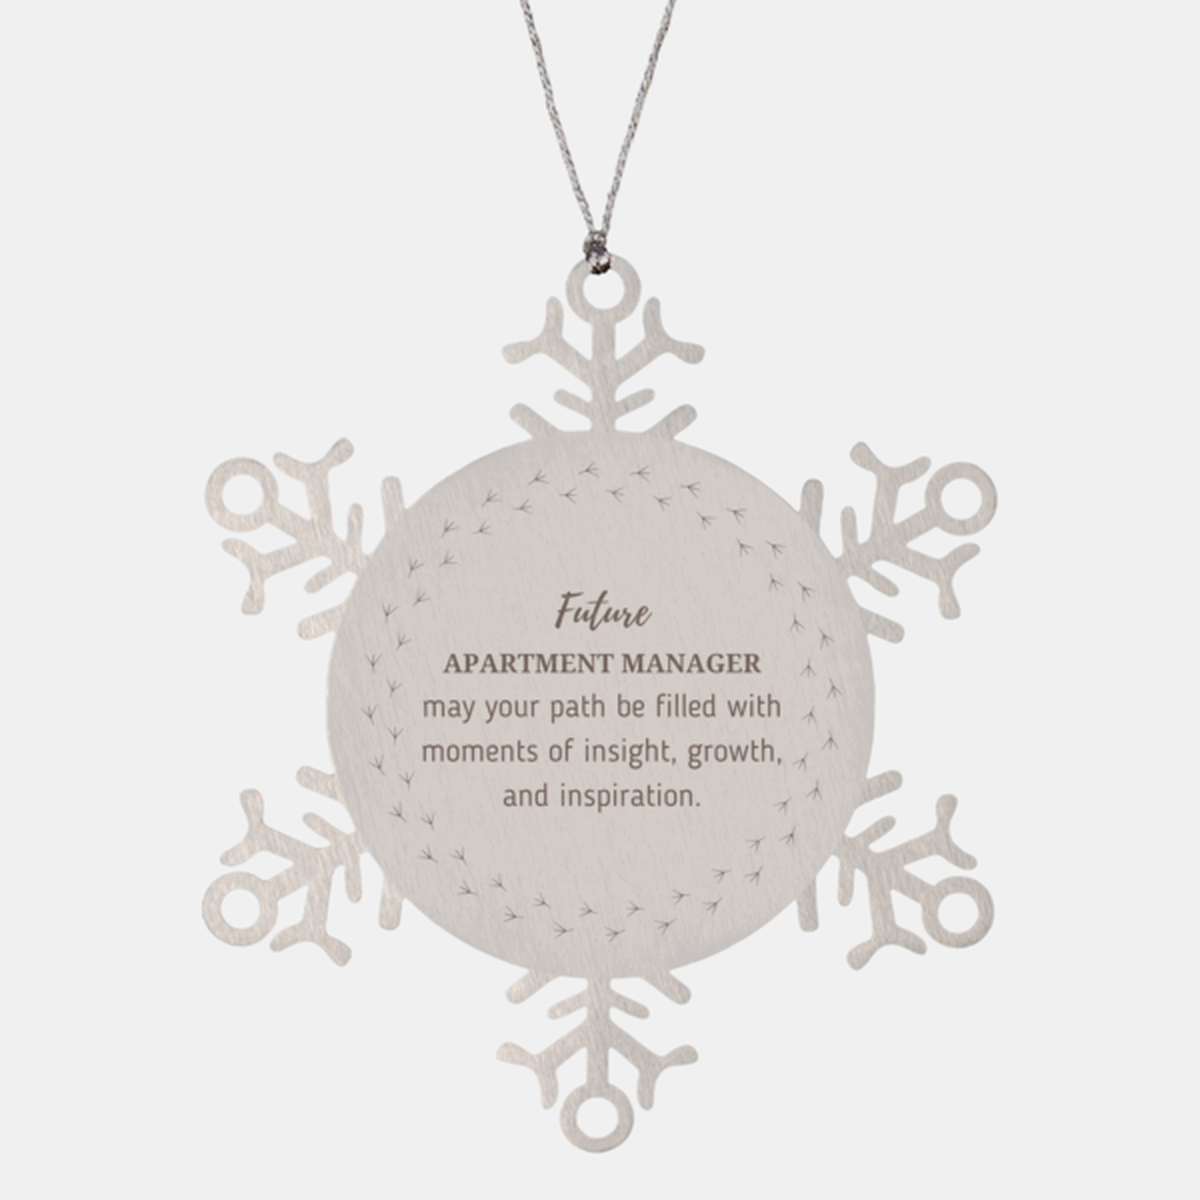 Future Apartment Manager Gifts, May your path be filled with moments of insight, Graduation Gifts for New Apartment Manager, Christmas Unique Snowflake Ornament For Men, Women, Friends